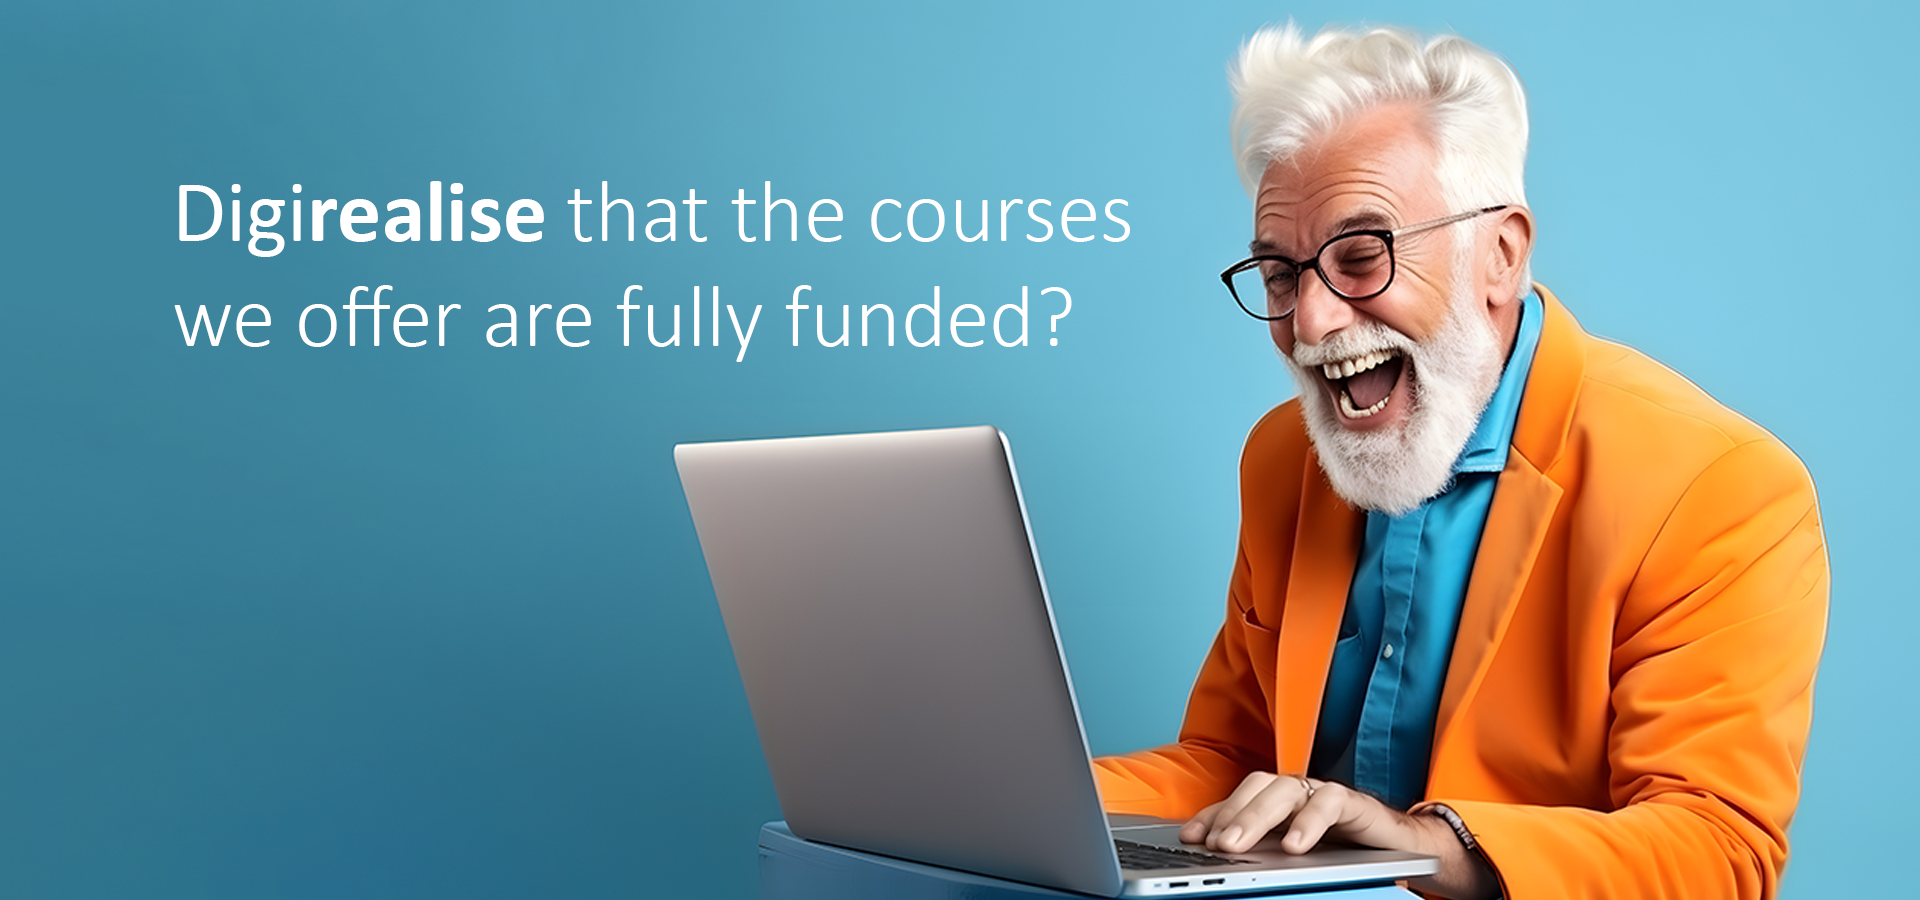 Digitay Graphic - Digirealise that the courses we offer are fully funded?